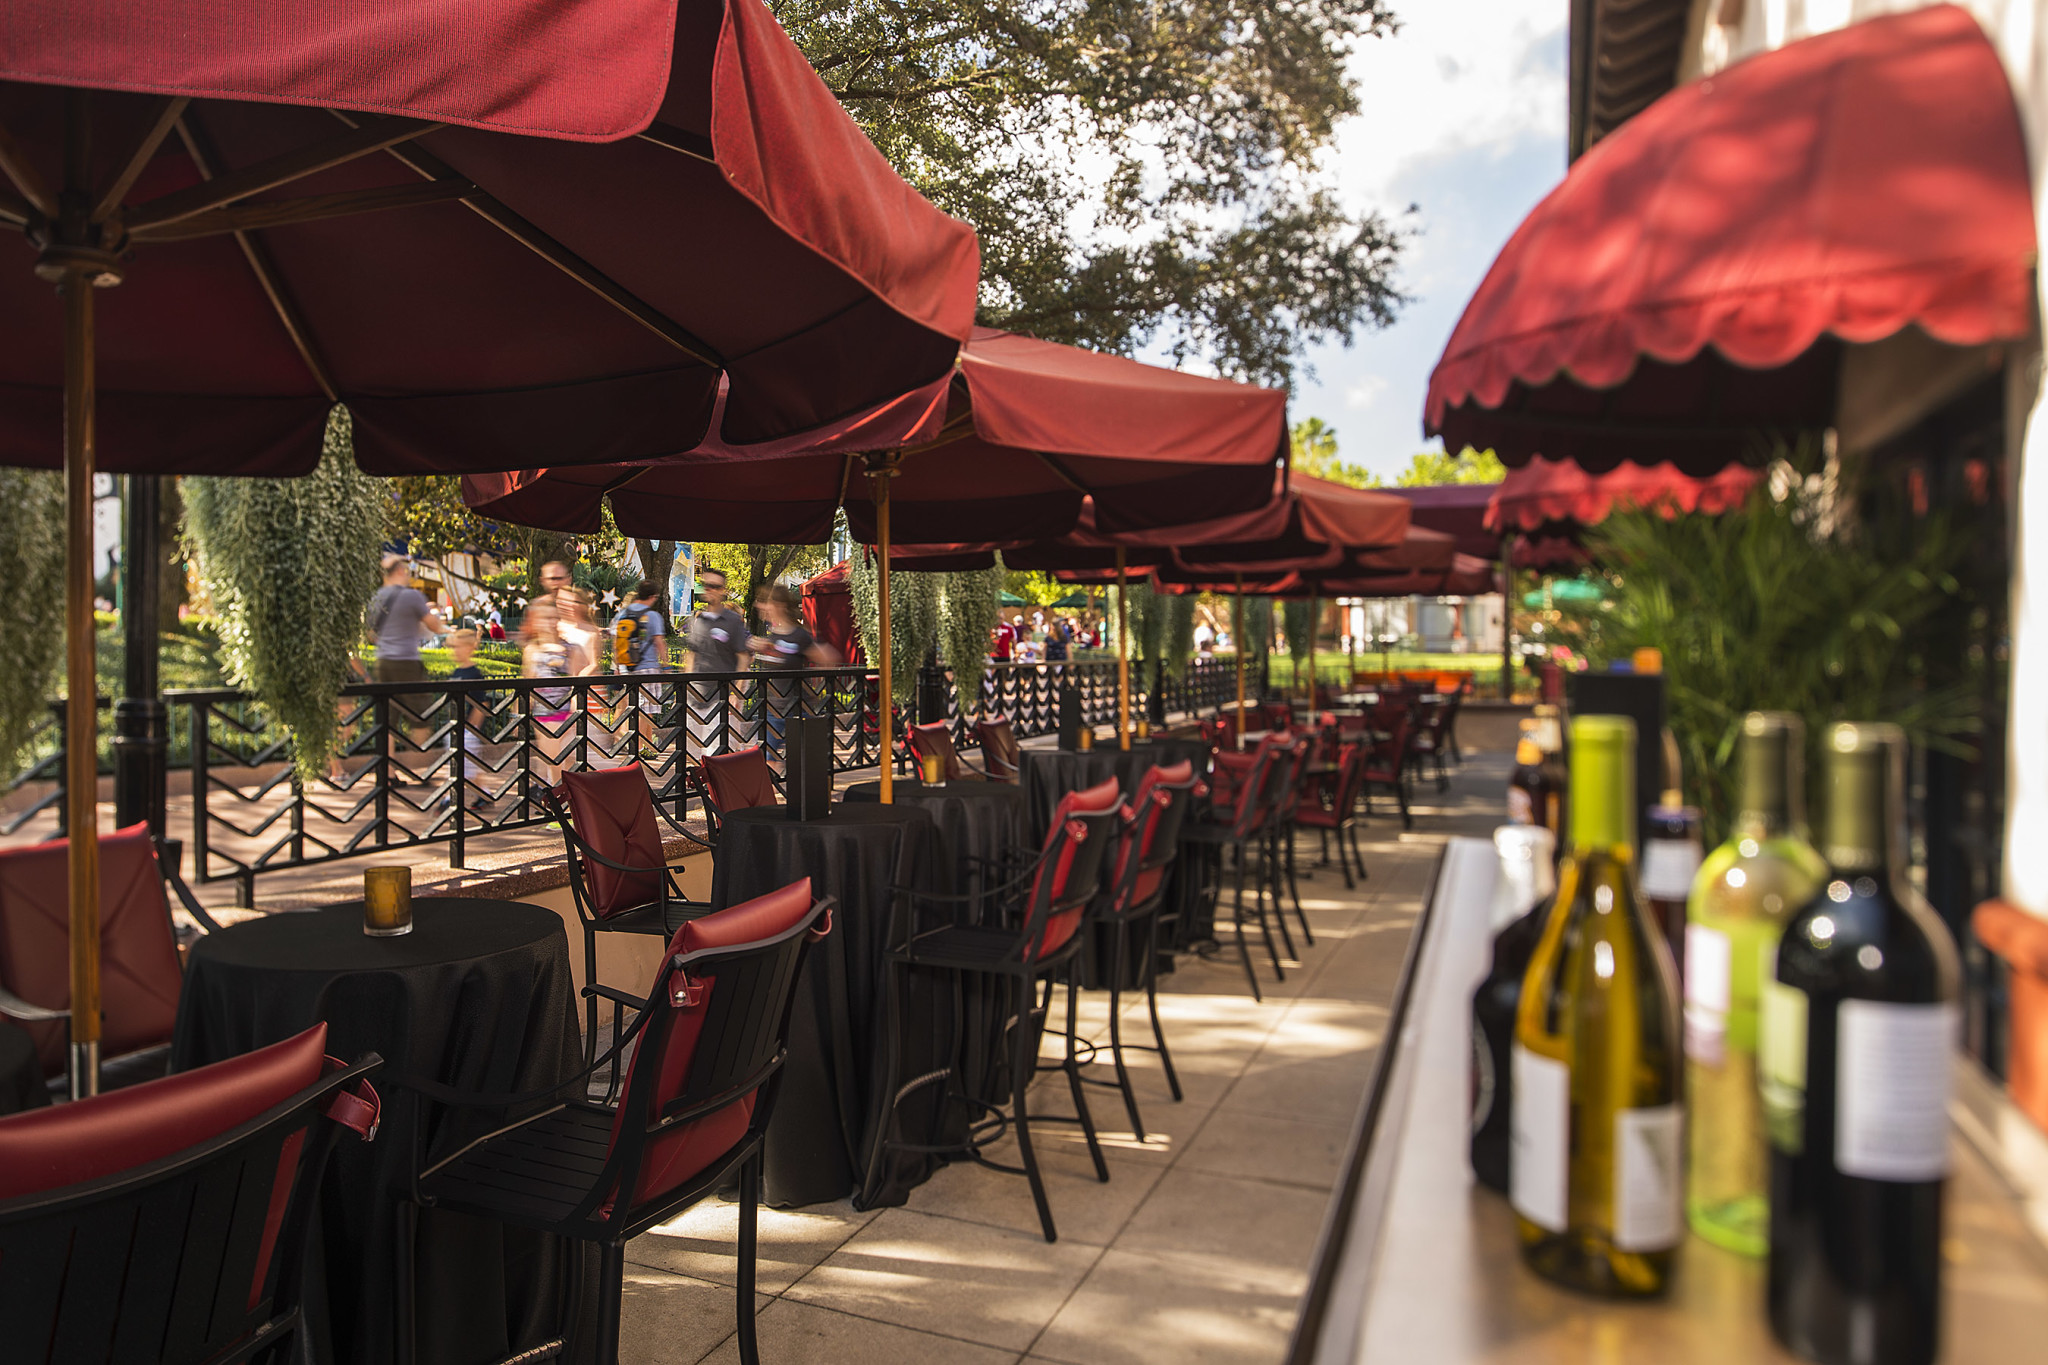 A new patio lounge at The Hollywood Brown Derby offers DisneyÕs Hollywood Studios guests a relaxing place beneath shade umbrellas where they can sip wine, beer and cocktails and enjoy small bites such as artisanal cheeses, duck confit tacos, Derby sliders and more. The new lounge, which opened October 2013, also features a delightful dessert menu with Chocolate Three Ways, a banana-white chocolate toffee tower on a cocoa-almond cookie, bananas Foster and strawberry Champagne cheesecake. Seating is first-come, first-served. DisneyÕs Hollywood Studios is located at Walt Disney World Resort in Lake Buena Vista, Fla. (Matt Stroshane, photographer)